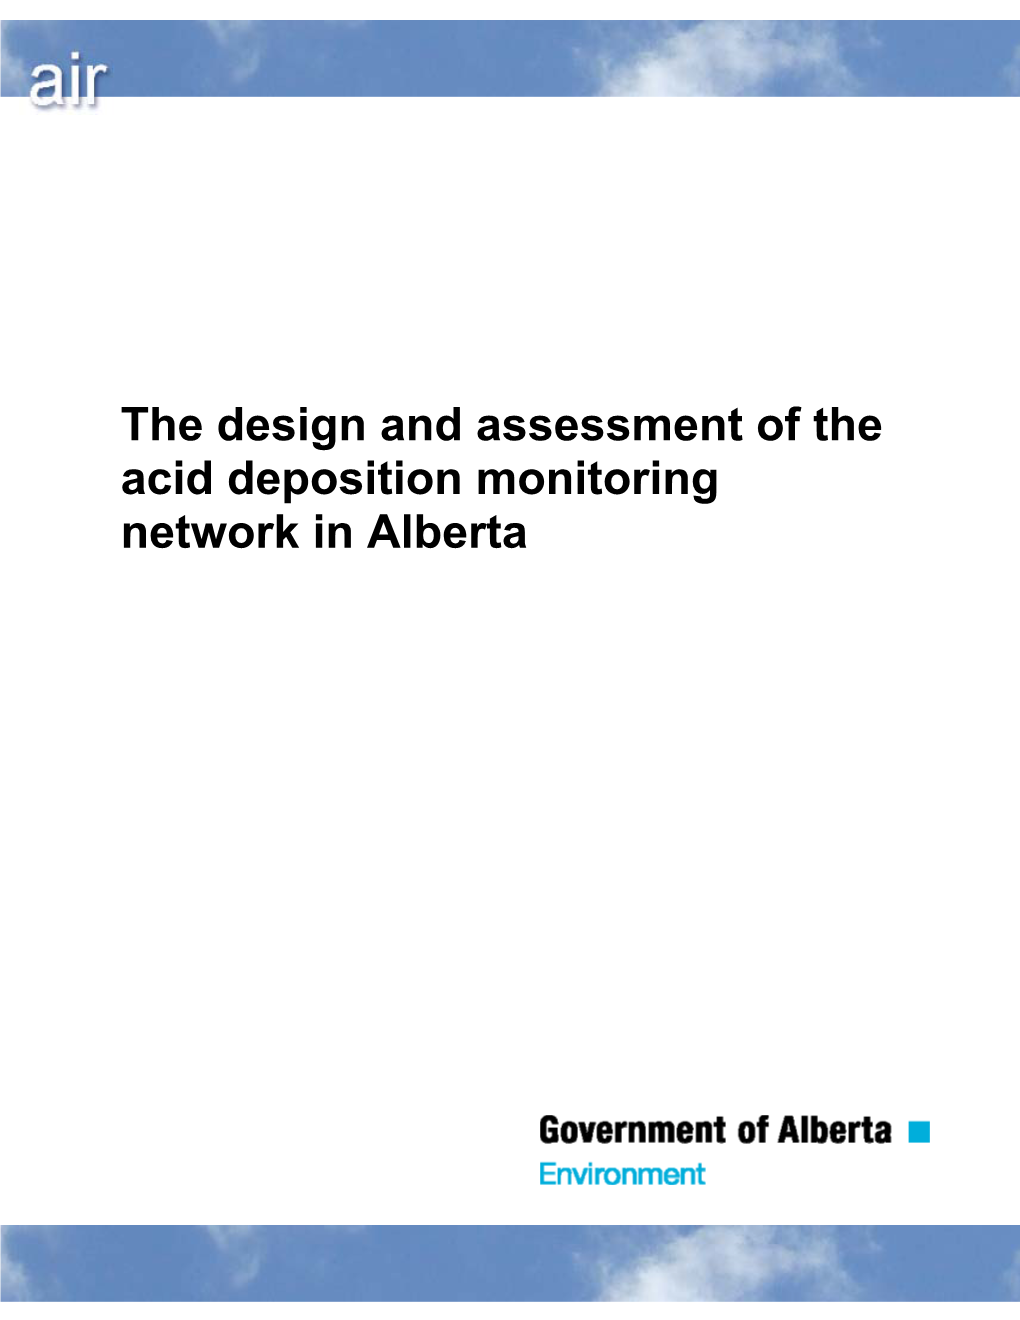 The Design and Assessment of the Acid Deposition Monitoring Network in Alberta